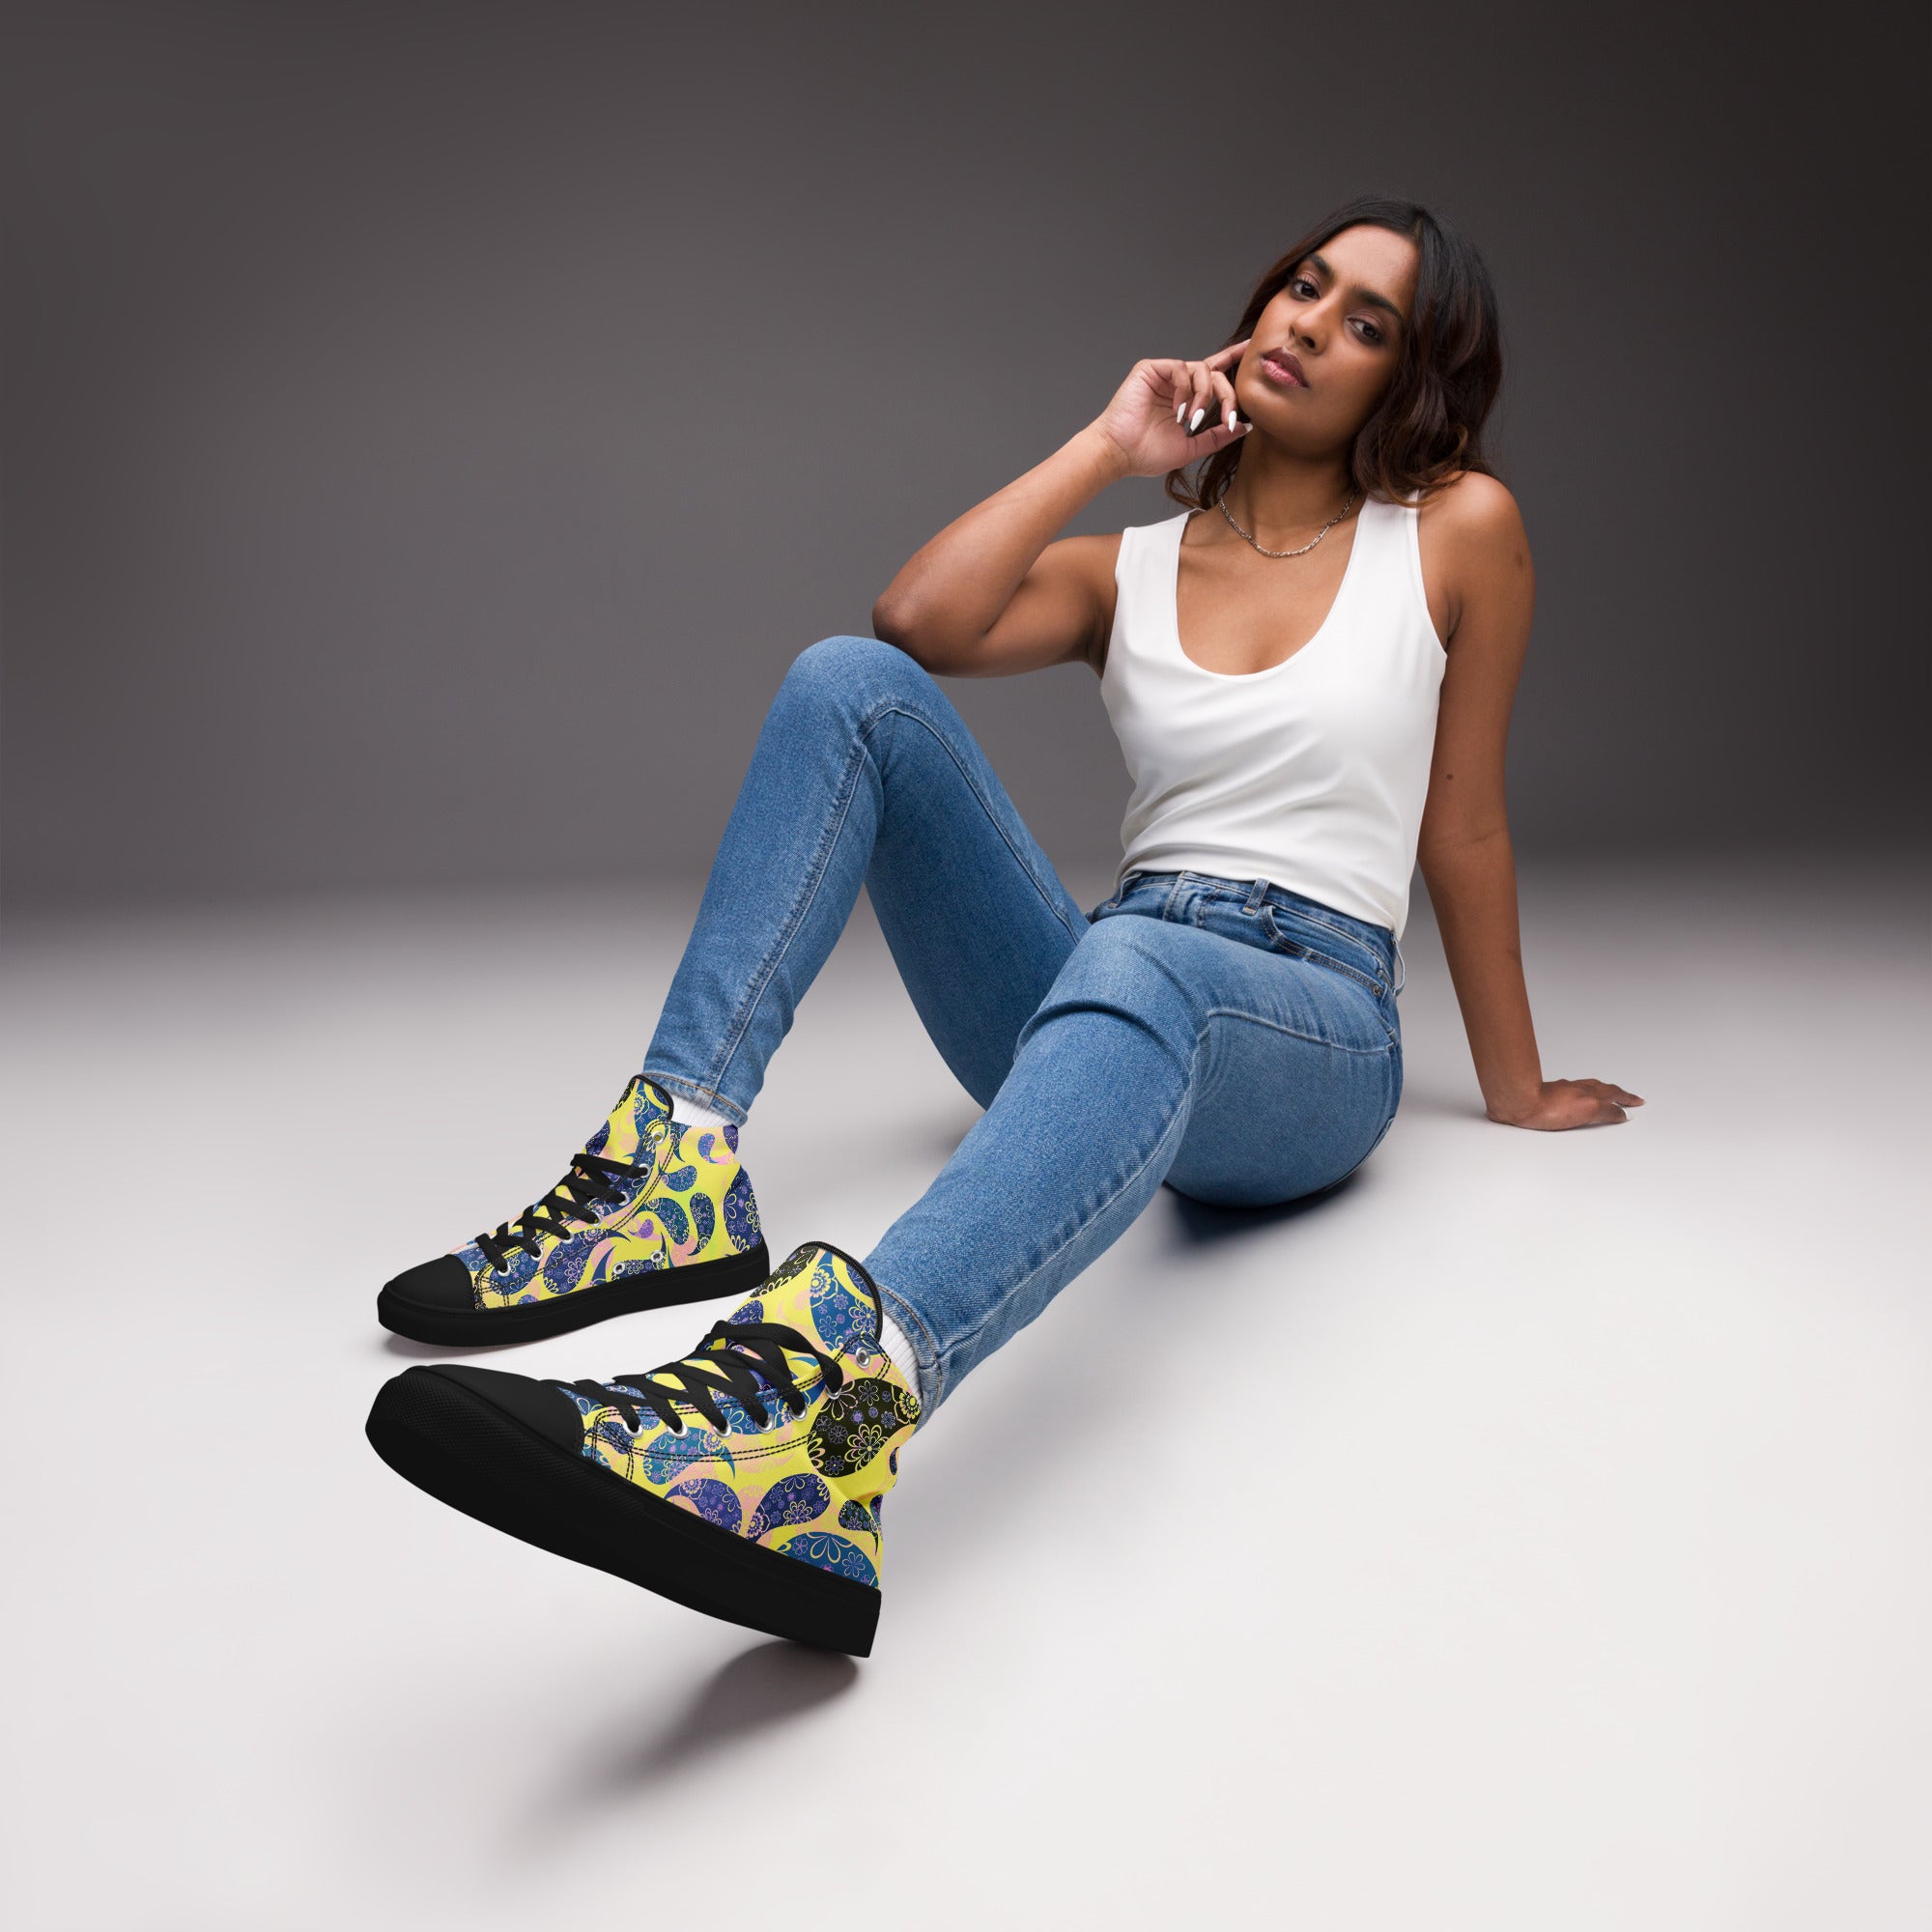 Women’s high top canvas shoes- Paisley Pattern III